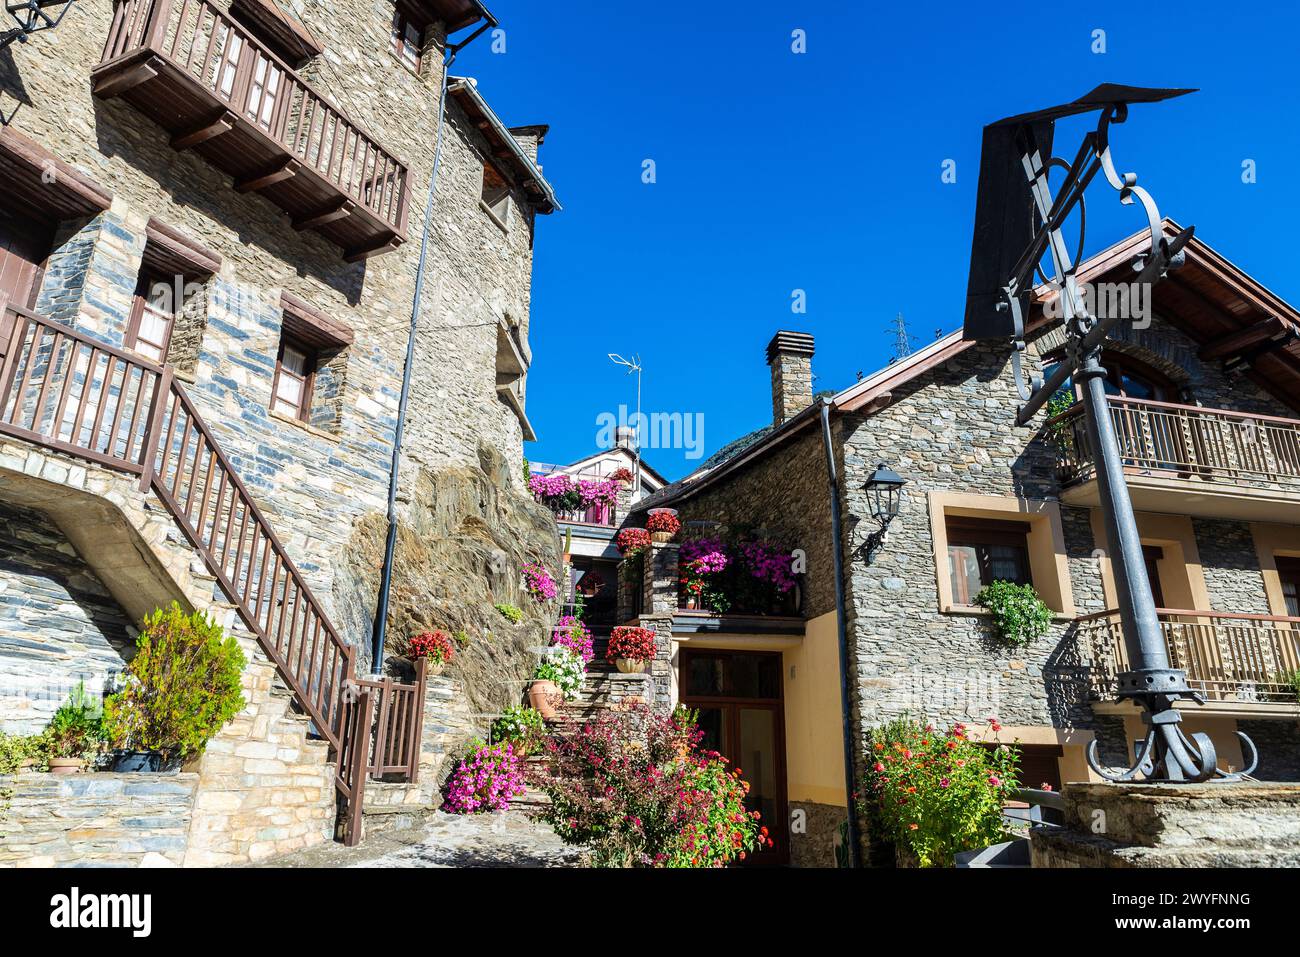 Facade of a typical house of the rustic village of Llavorsi, Lleida, Catalonia, Spain Stock Photo